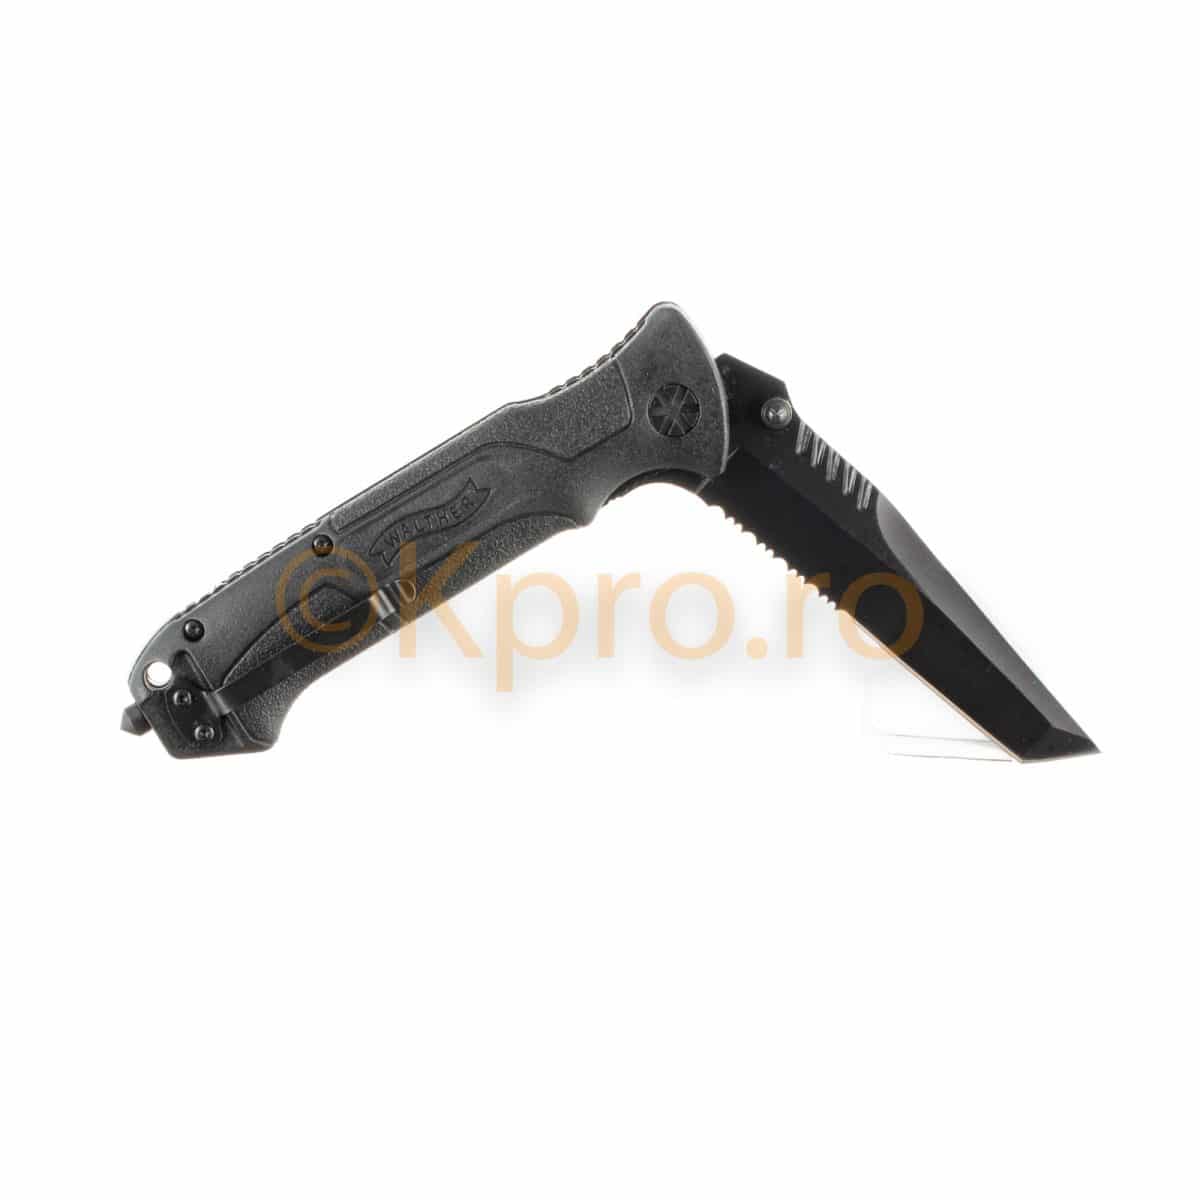 Briceag tactic tanto Walther BTK2 5.0787